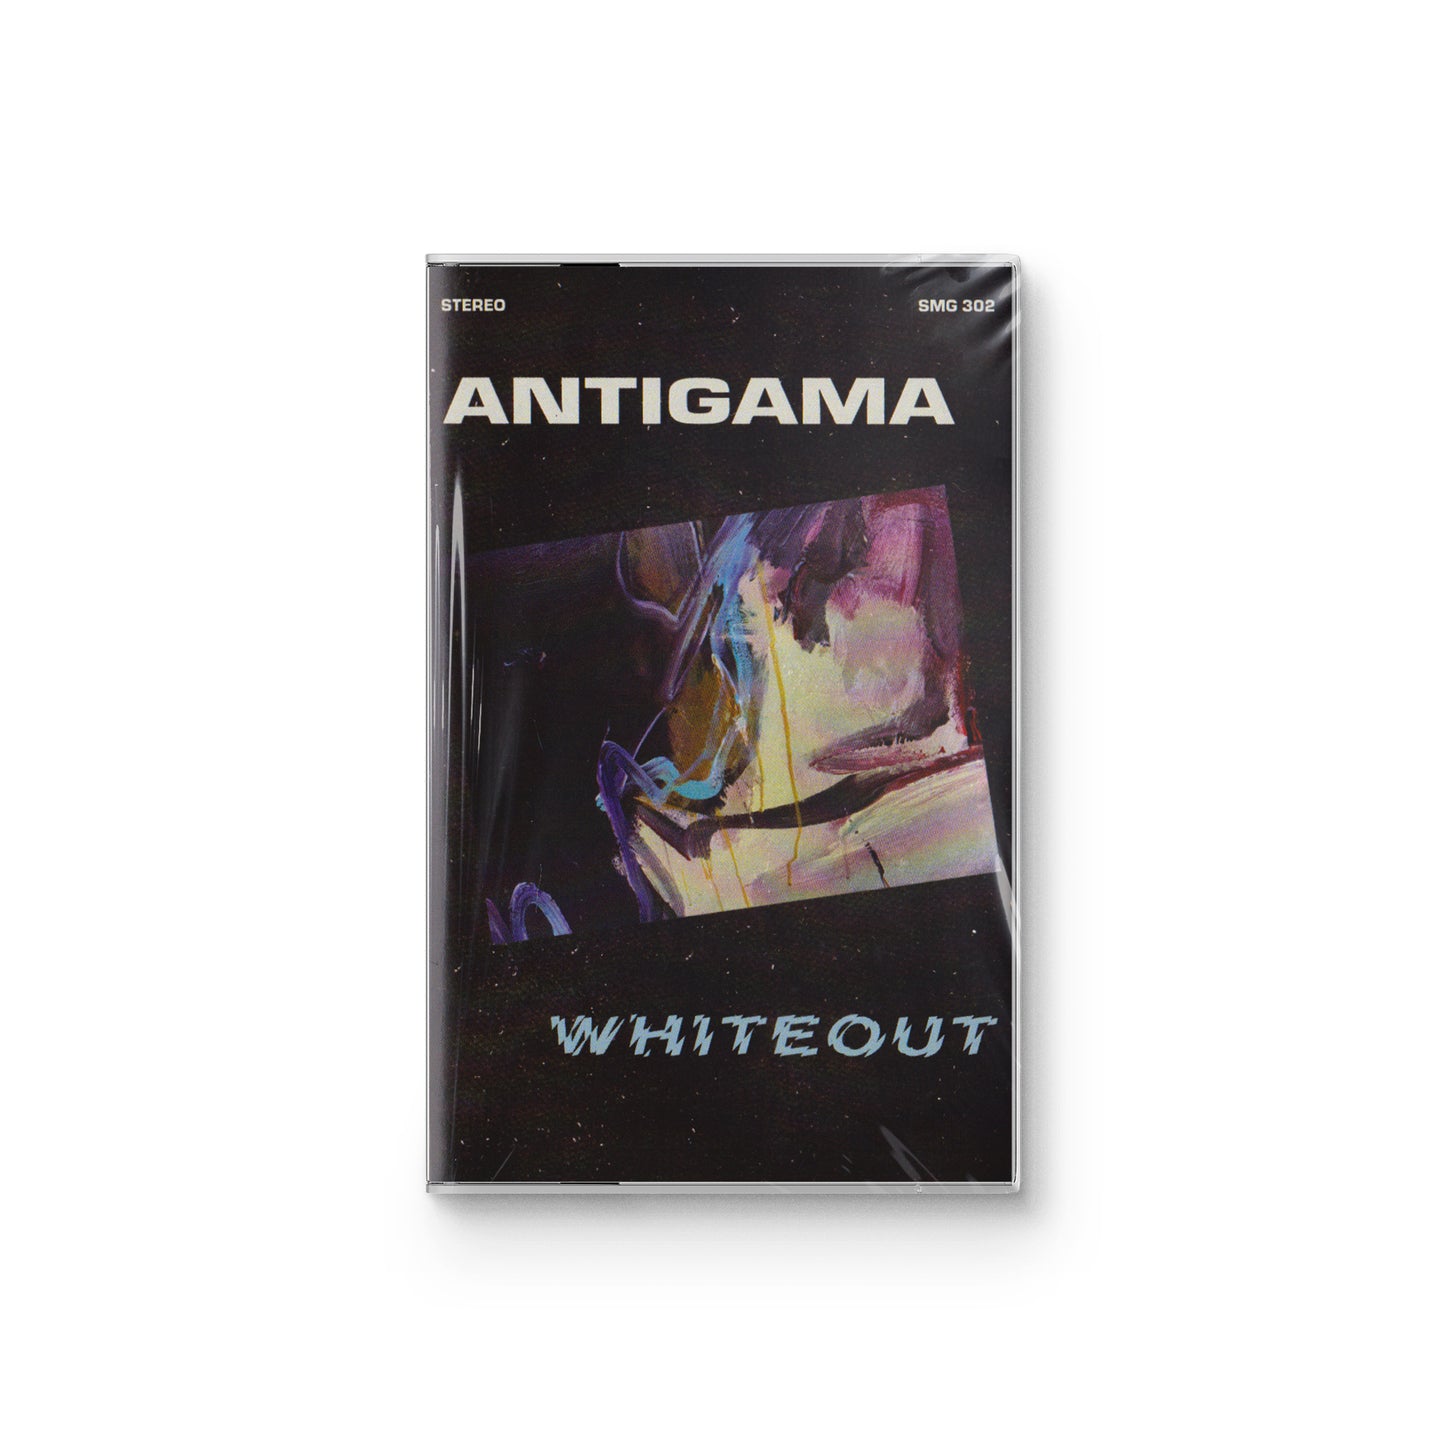 Antigama "Whiteout" CASSETTE